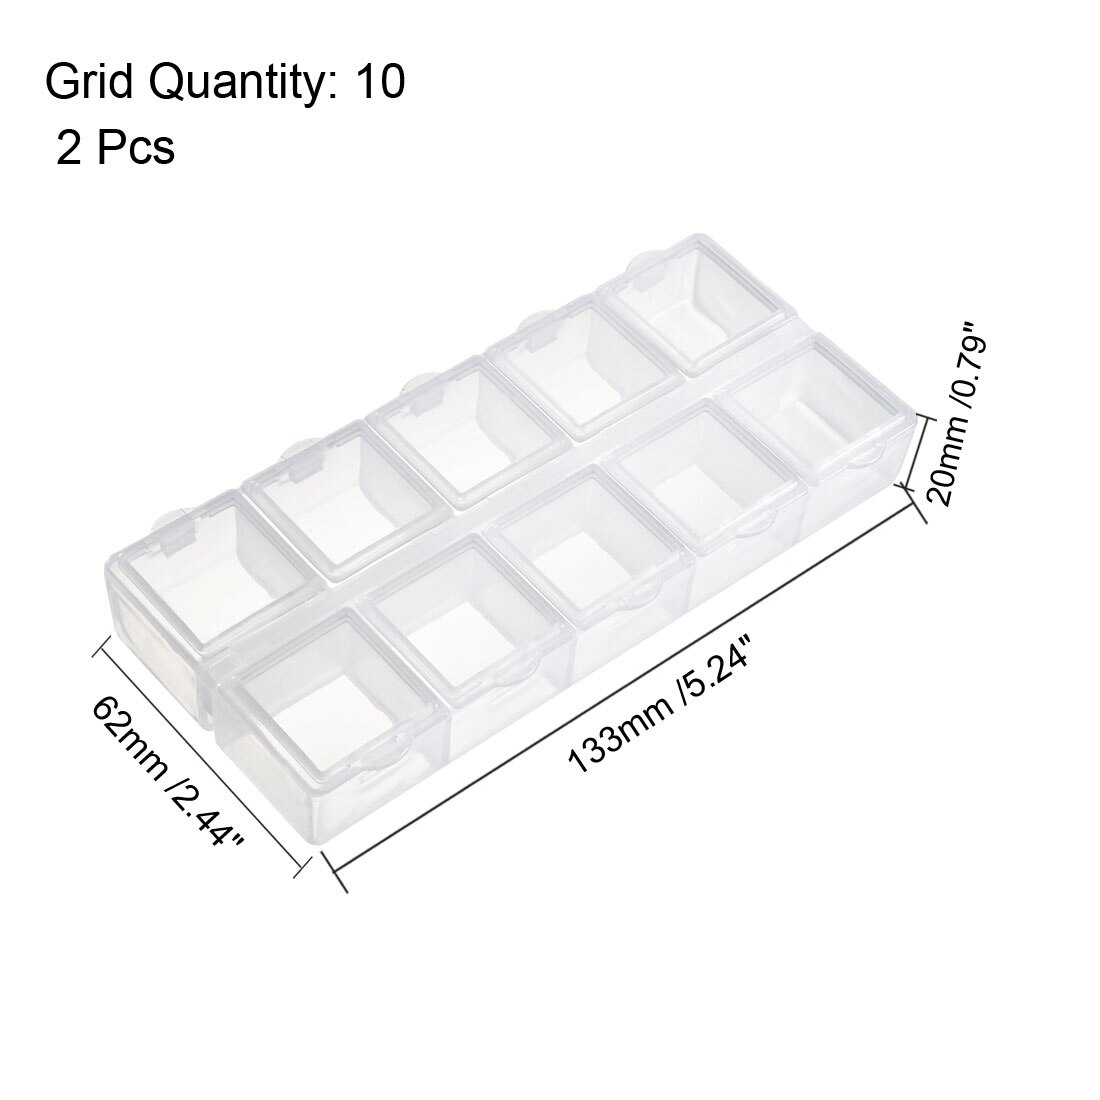 Uxcell Component Opbergdoos-Ps Vaste 10 Grids W Aparte Cover Elektronische Component Containers Clear White 133X62X20 Mm 2 Stuks